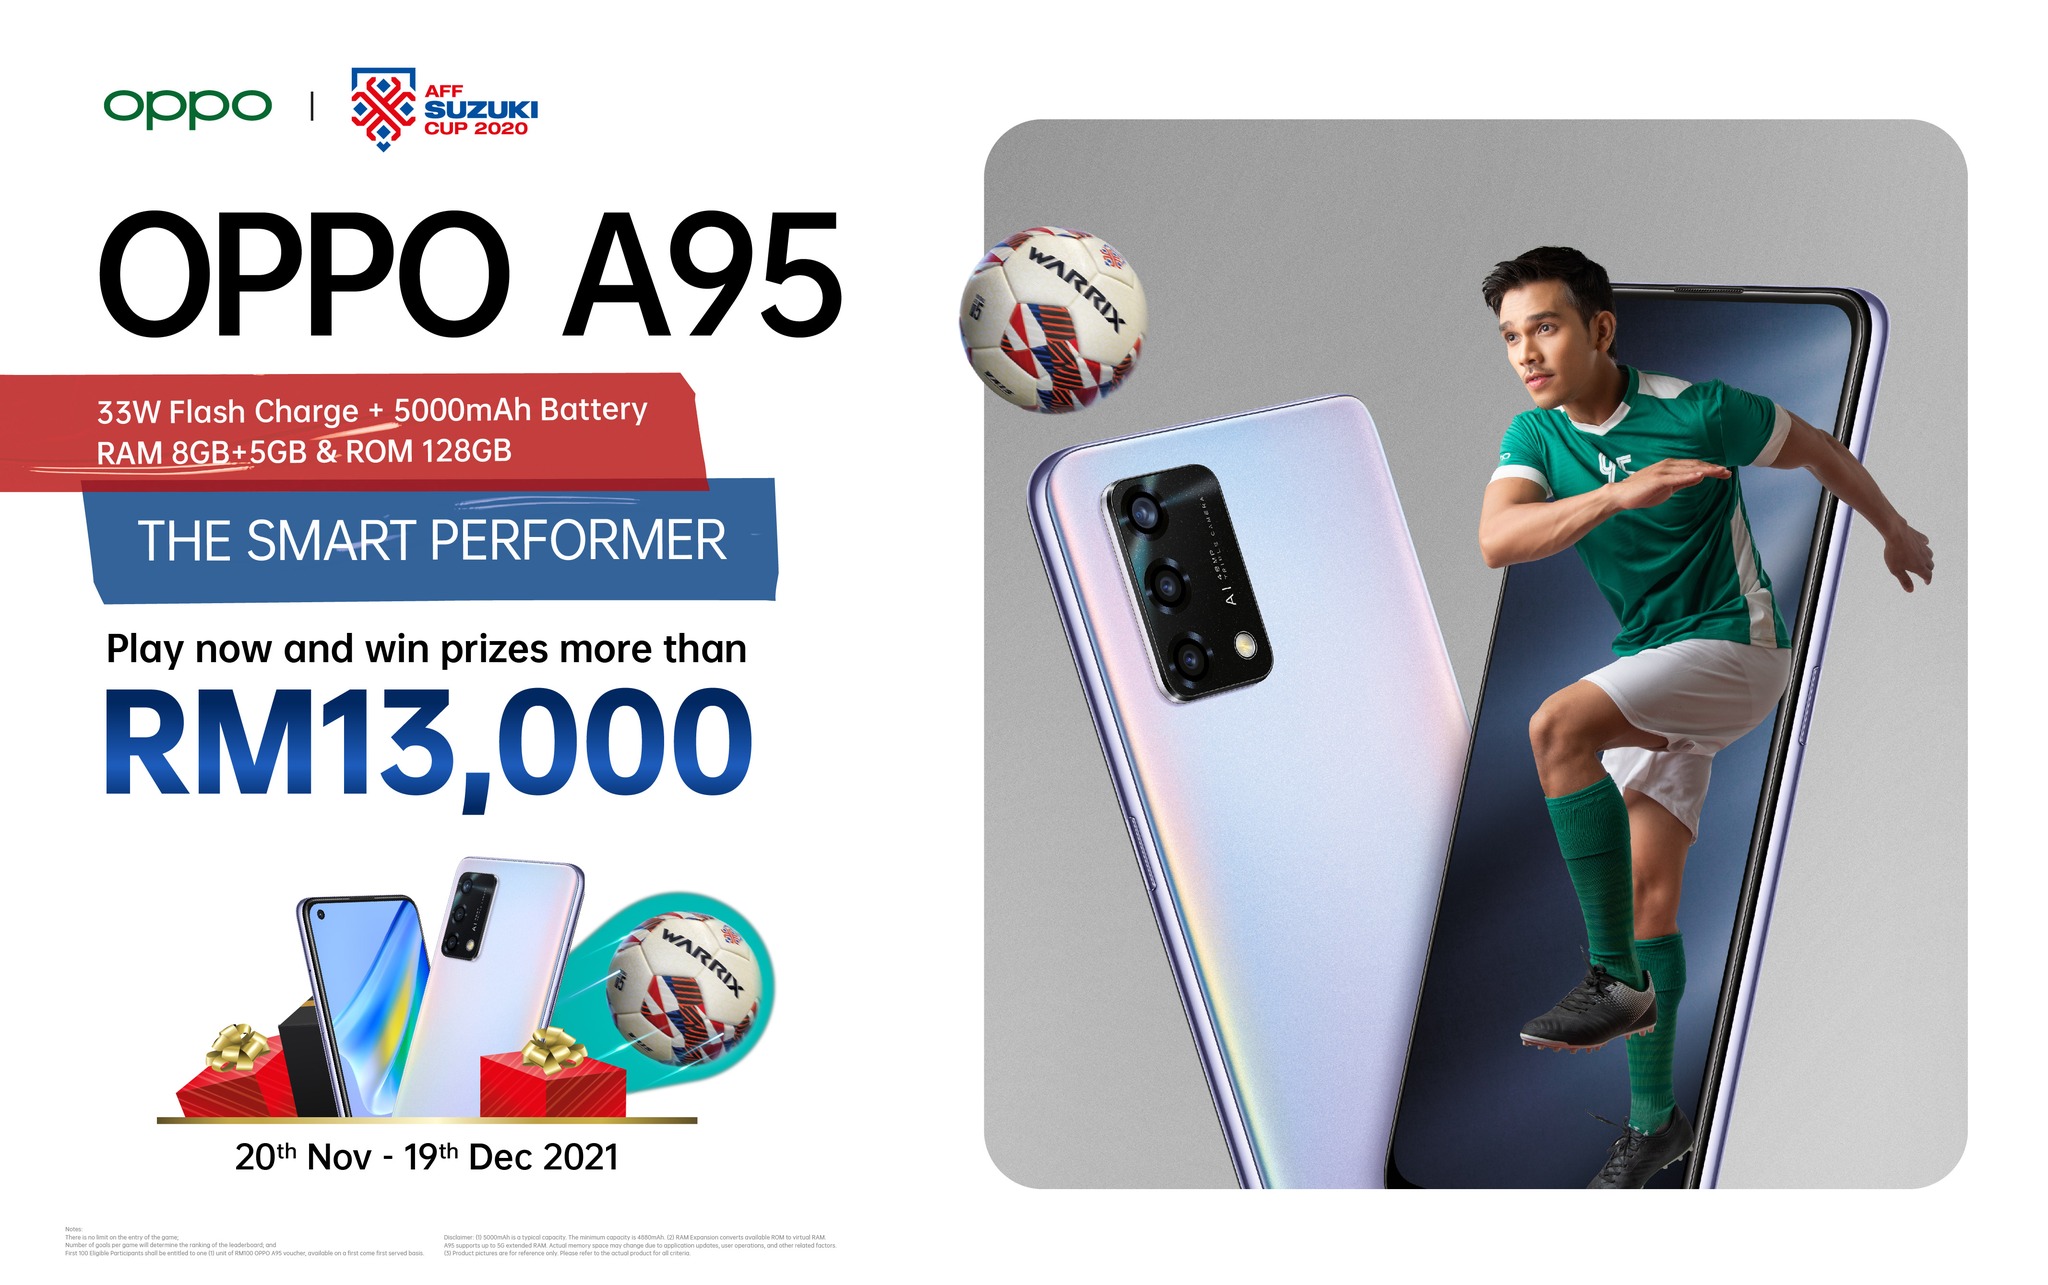 Fancy yourself a new phone? Try your luck and win prizes worth up to more than RM13,000!